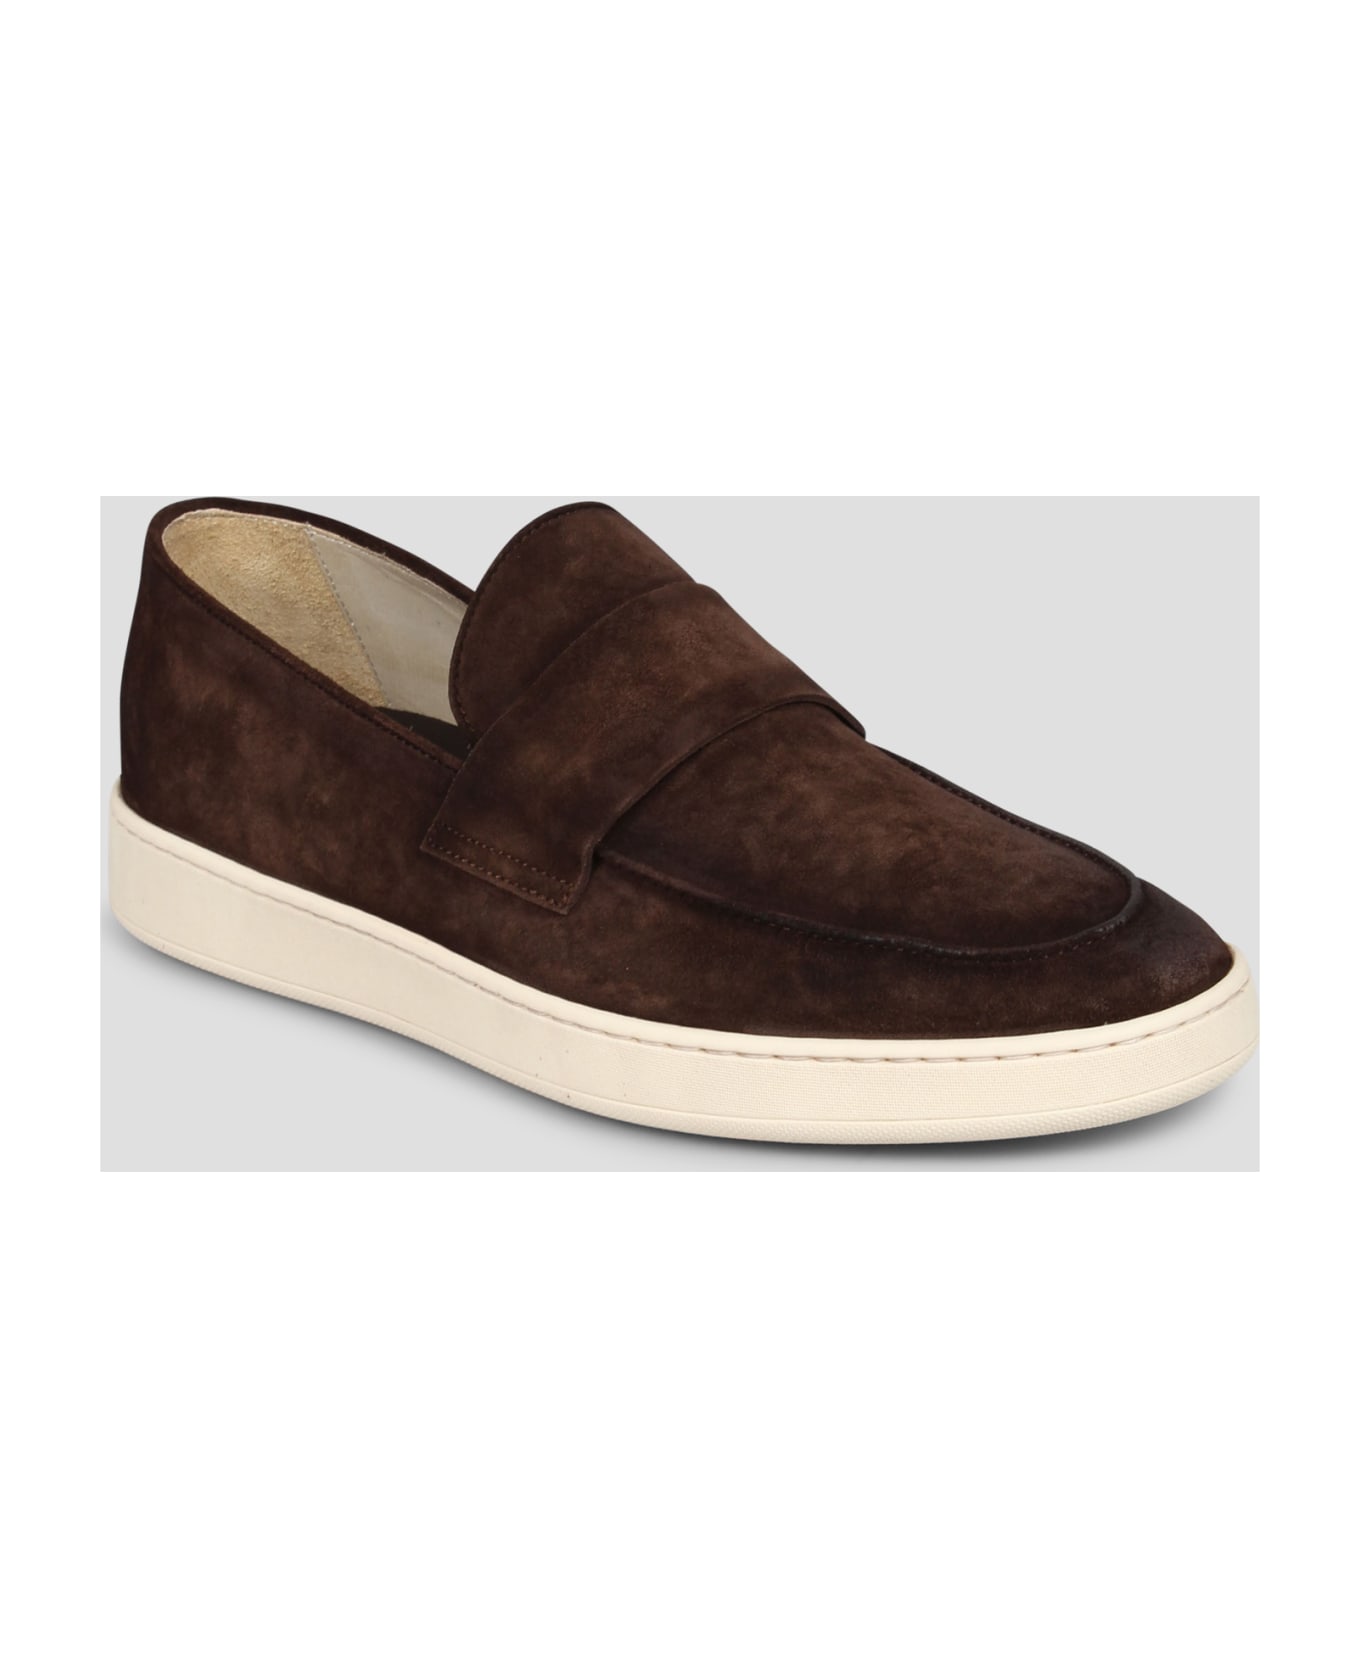 Corvari Boat Penny Loafers - Brown